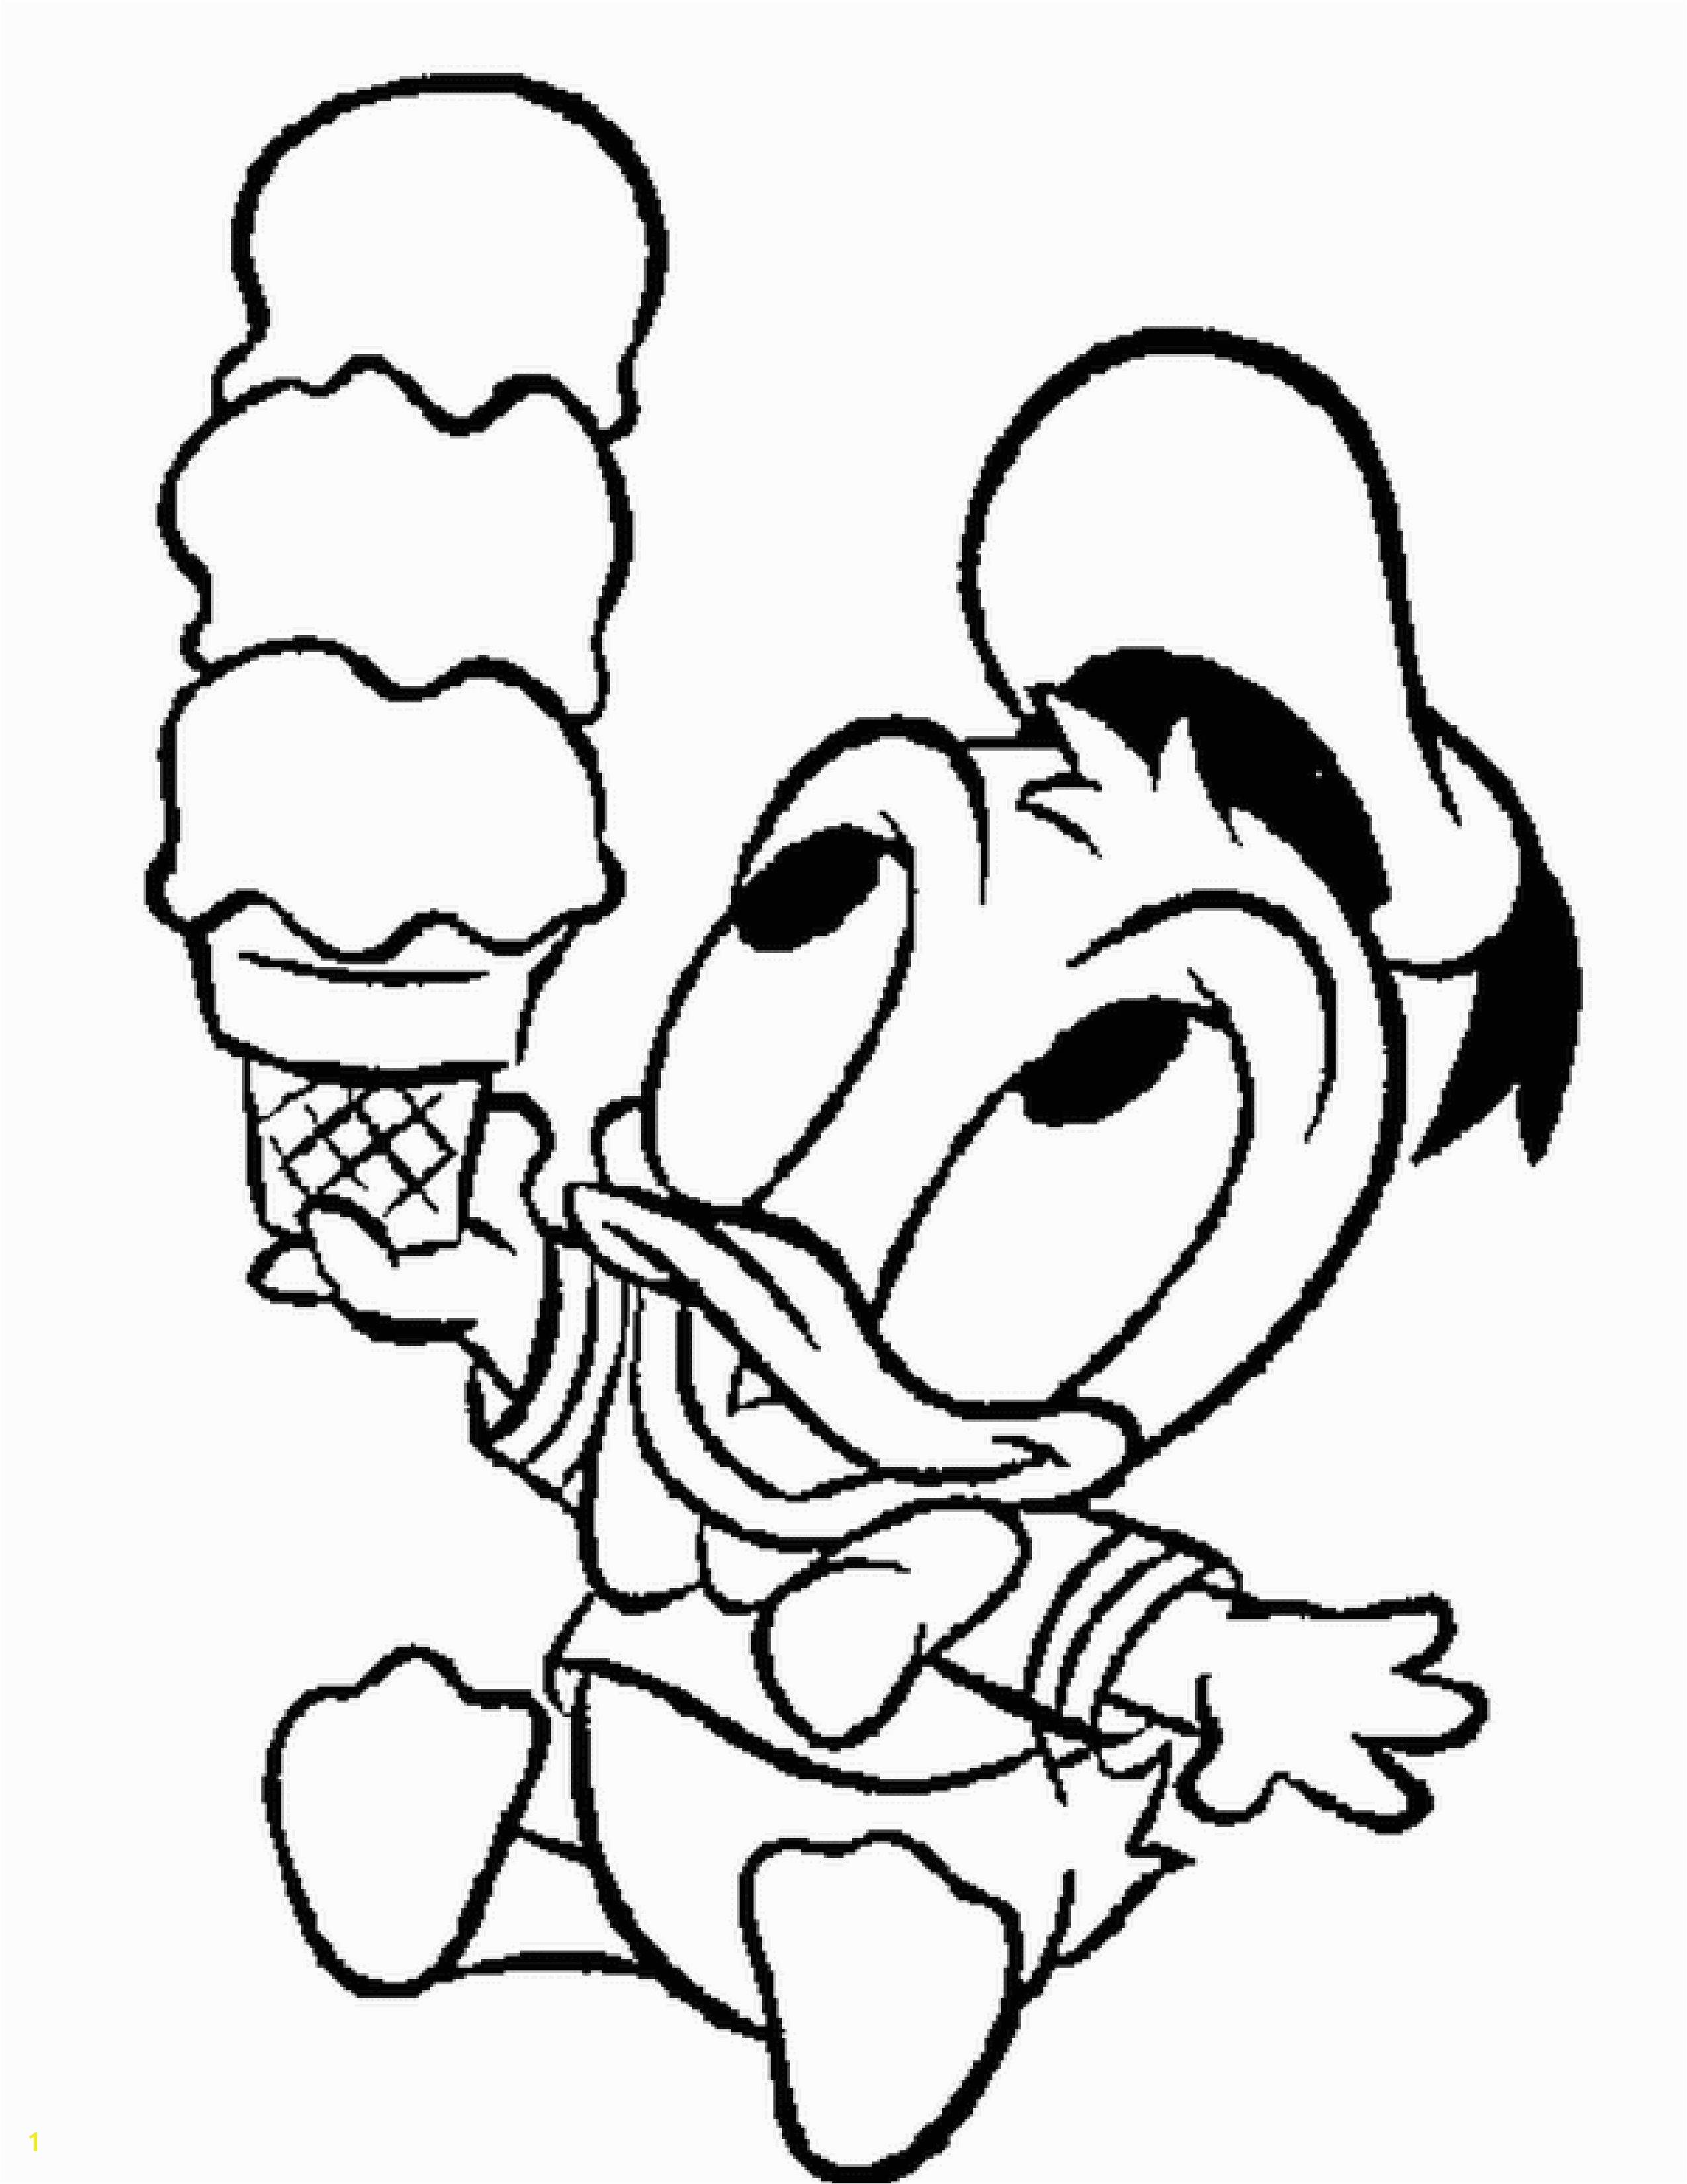 Donald Duck Coloring Pages To Print For Free Donald Duck Coloring Pages 